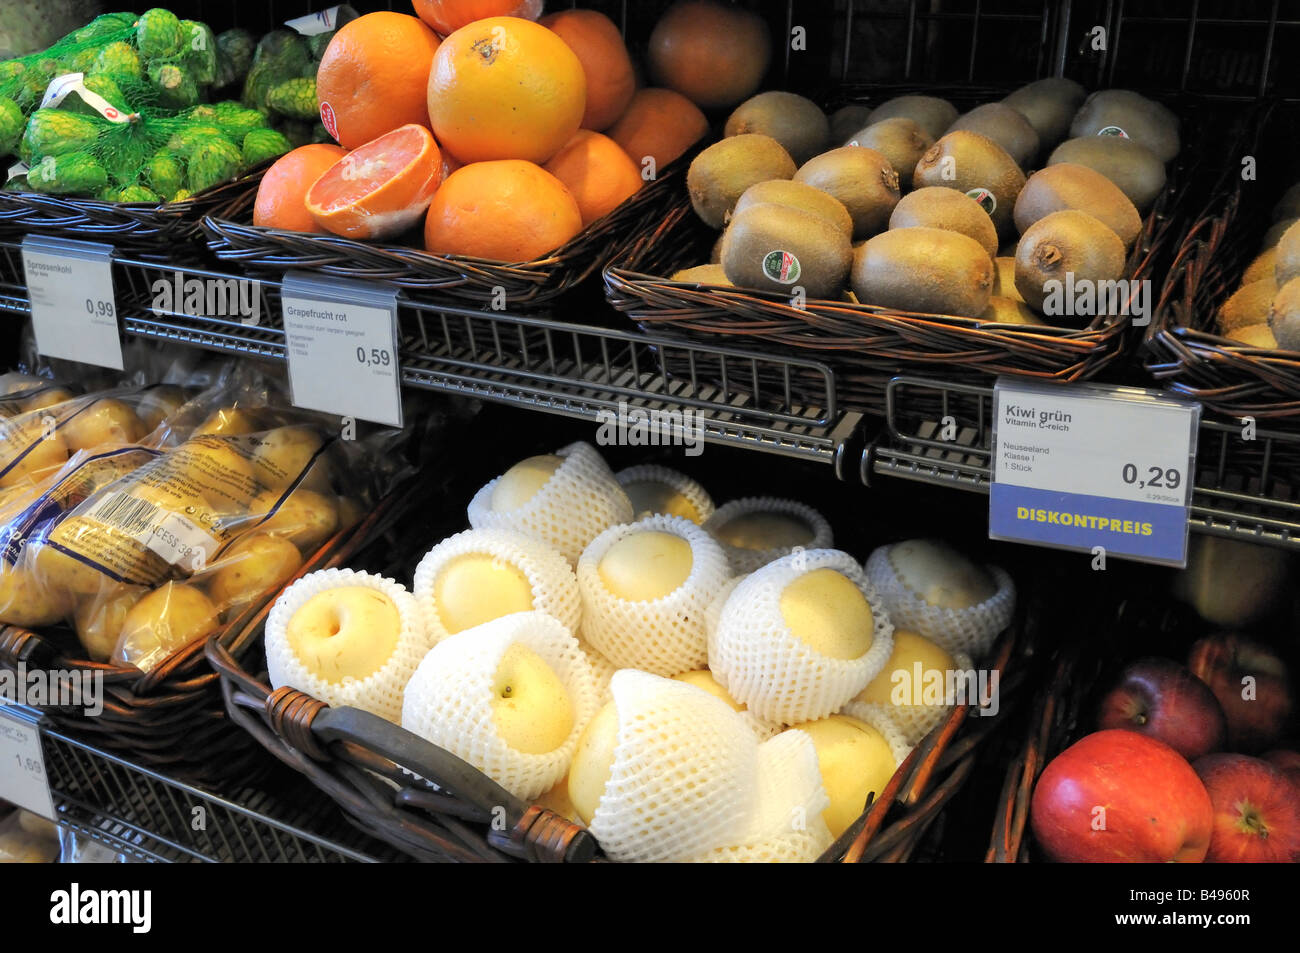 Fruit and vegetables for sale in a supermarket in Soll in Austria Stock Photo